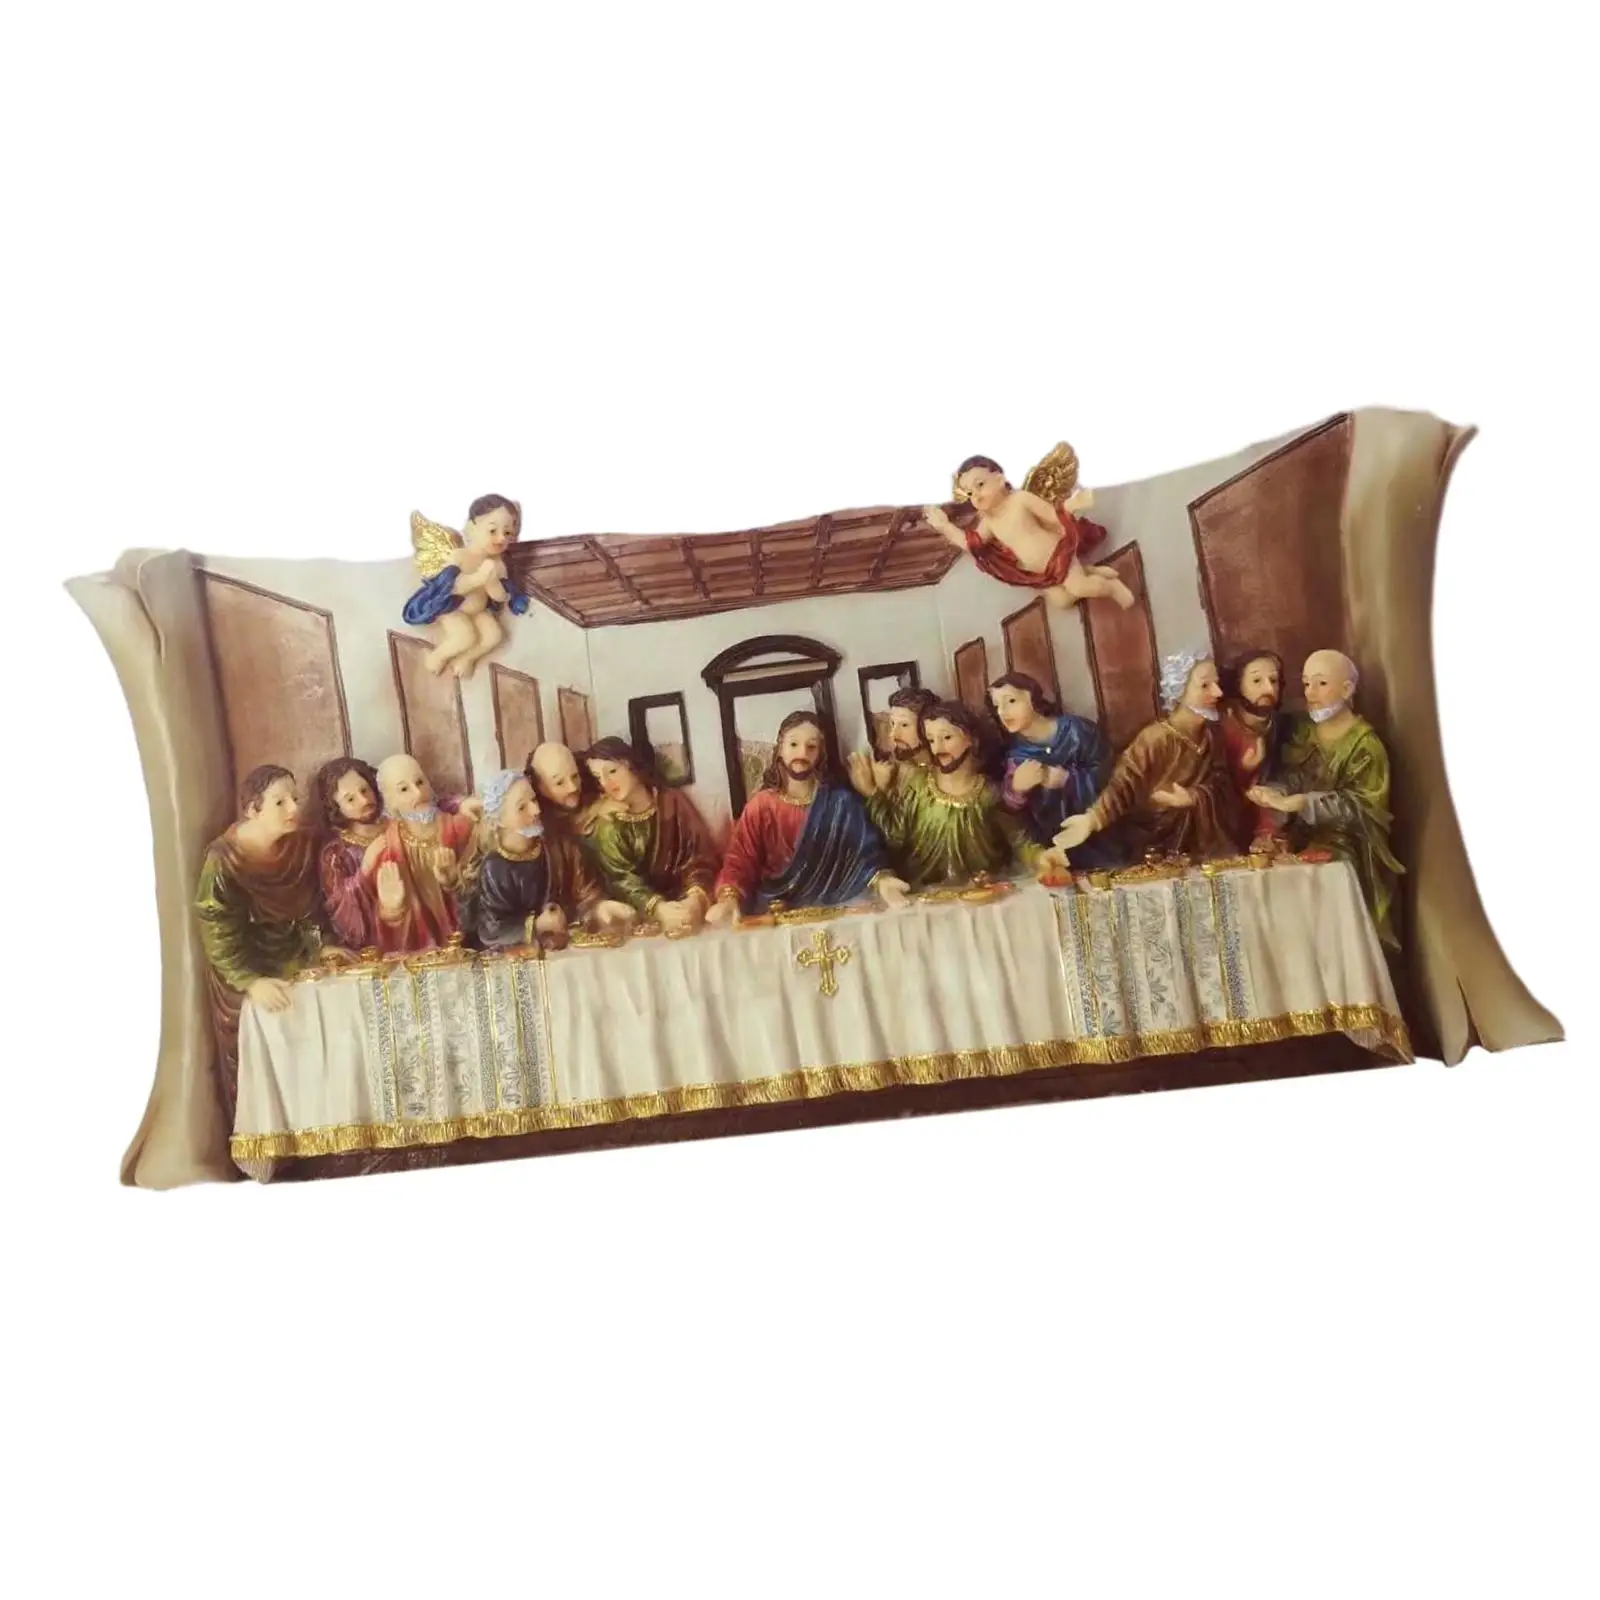 Resin Last Supper Sculpture Statue The Last Supper Scene Artwork Jesus and 12 Disciples for Living Room Ornaments Decoration